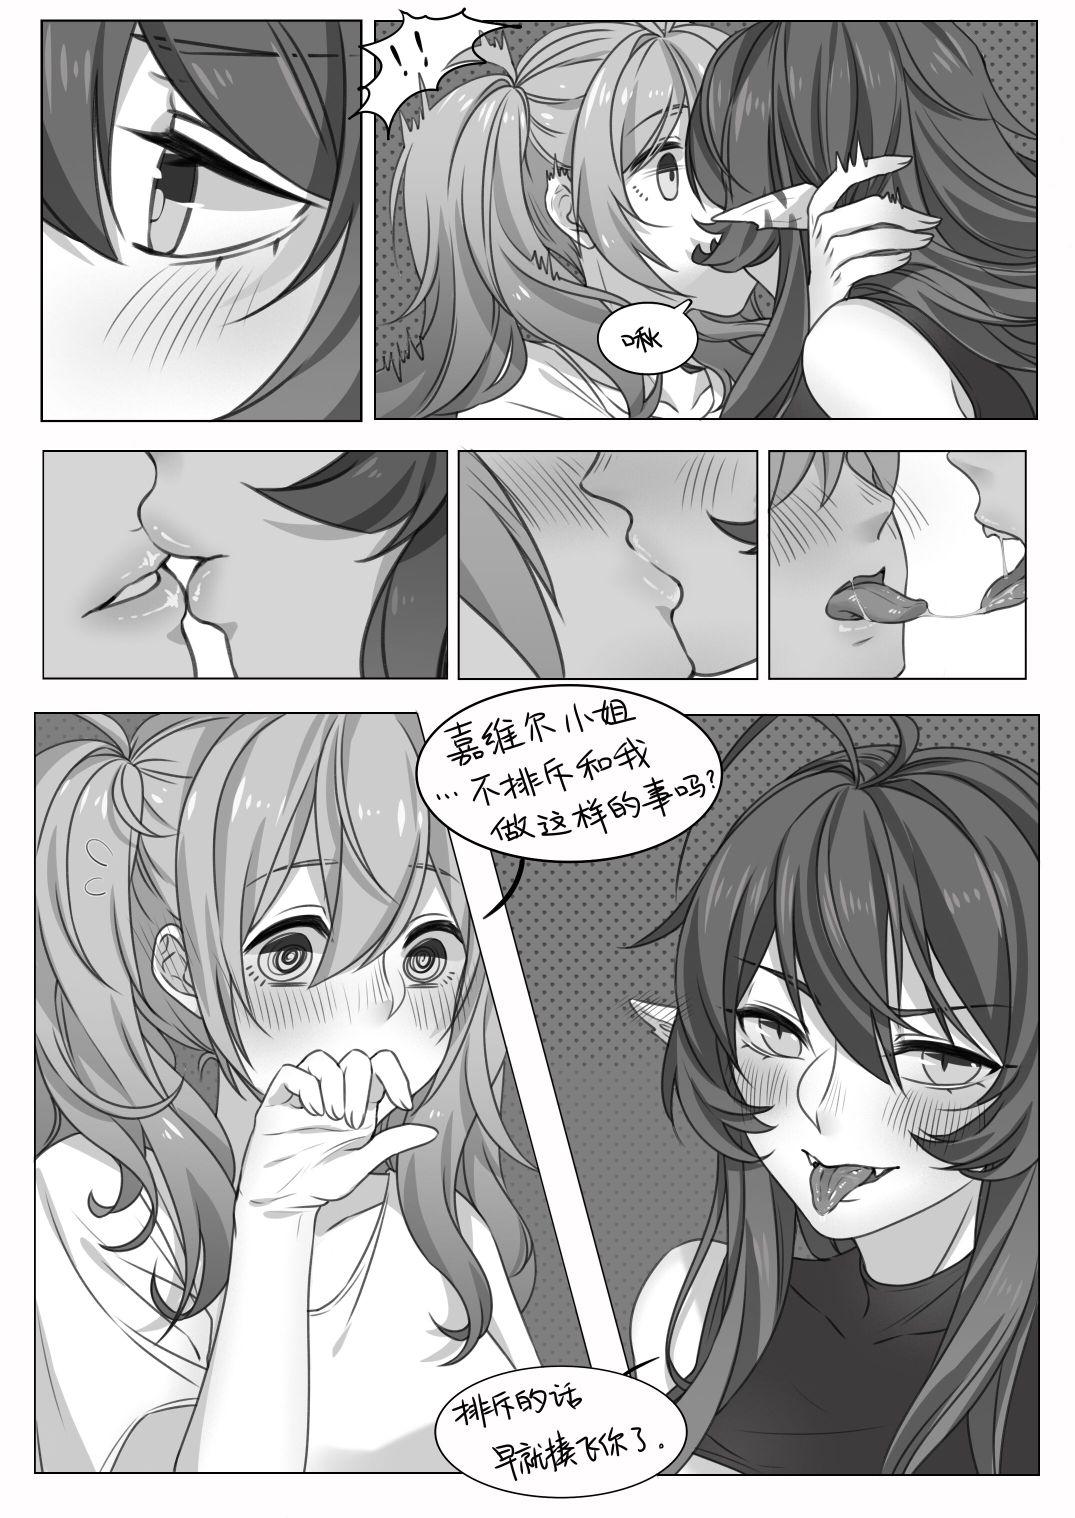 Small Tits Porn 向满信赖的嘉维尔小姐请求打炮会被拒绝吗？ - Arknights All Natural - Page 7